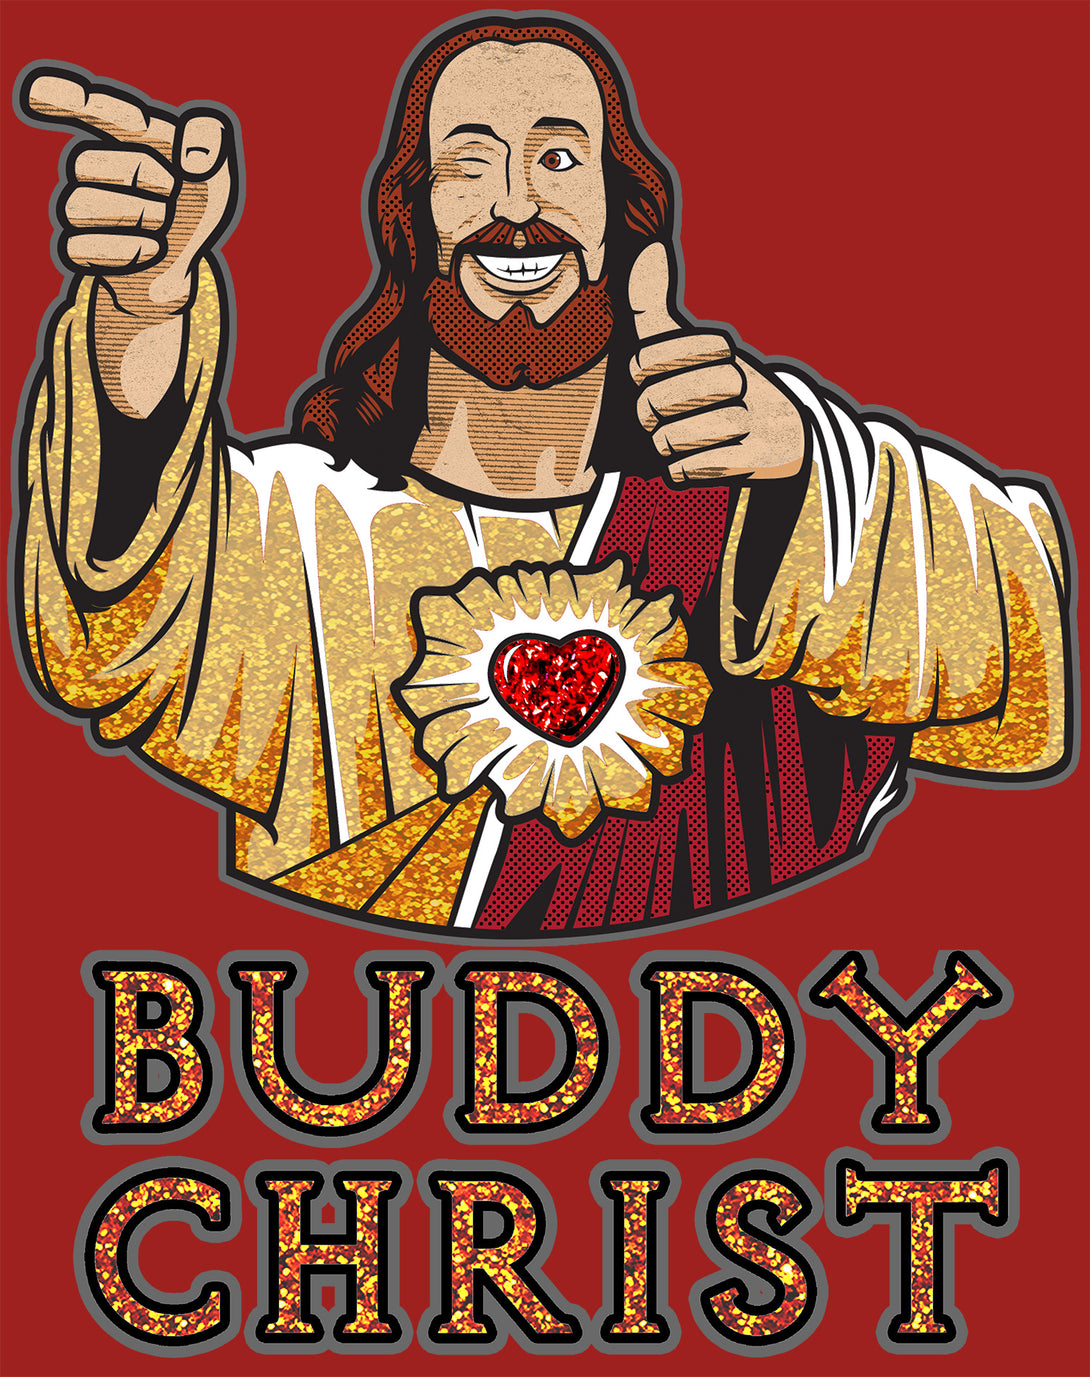 Kevin Smith View Askewniverse Buddy Christ Got Golden Wow Edition Official Men's T-Shirt Rd - Urban Species Design Close Up